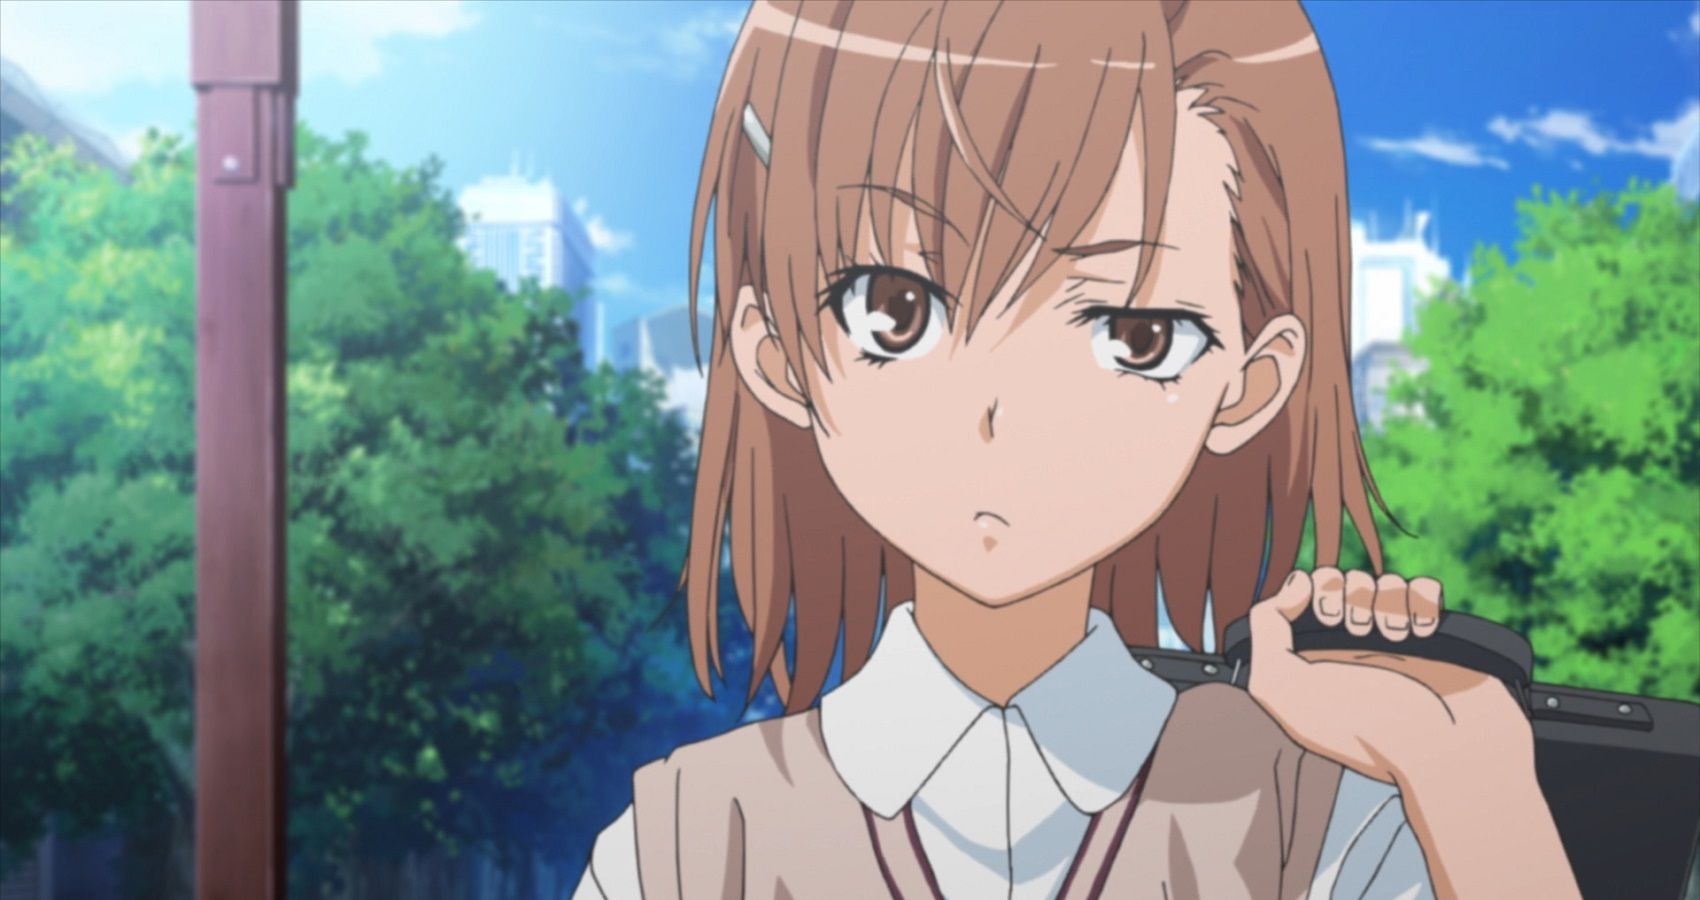 The 10 Most Popular Female Anime Characters Of 2019 (According To Kono